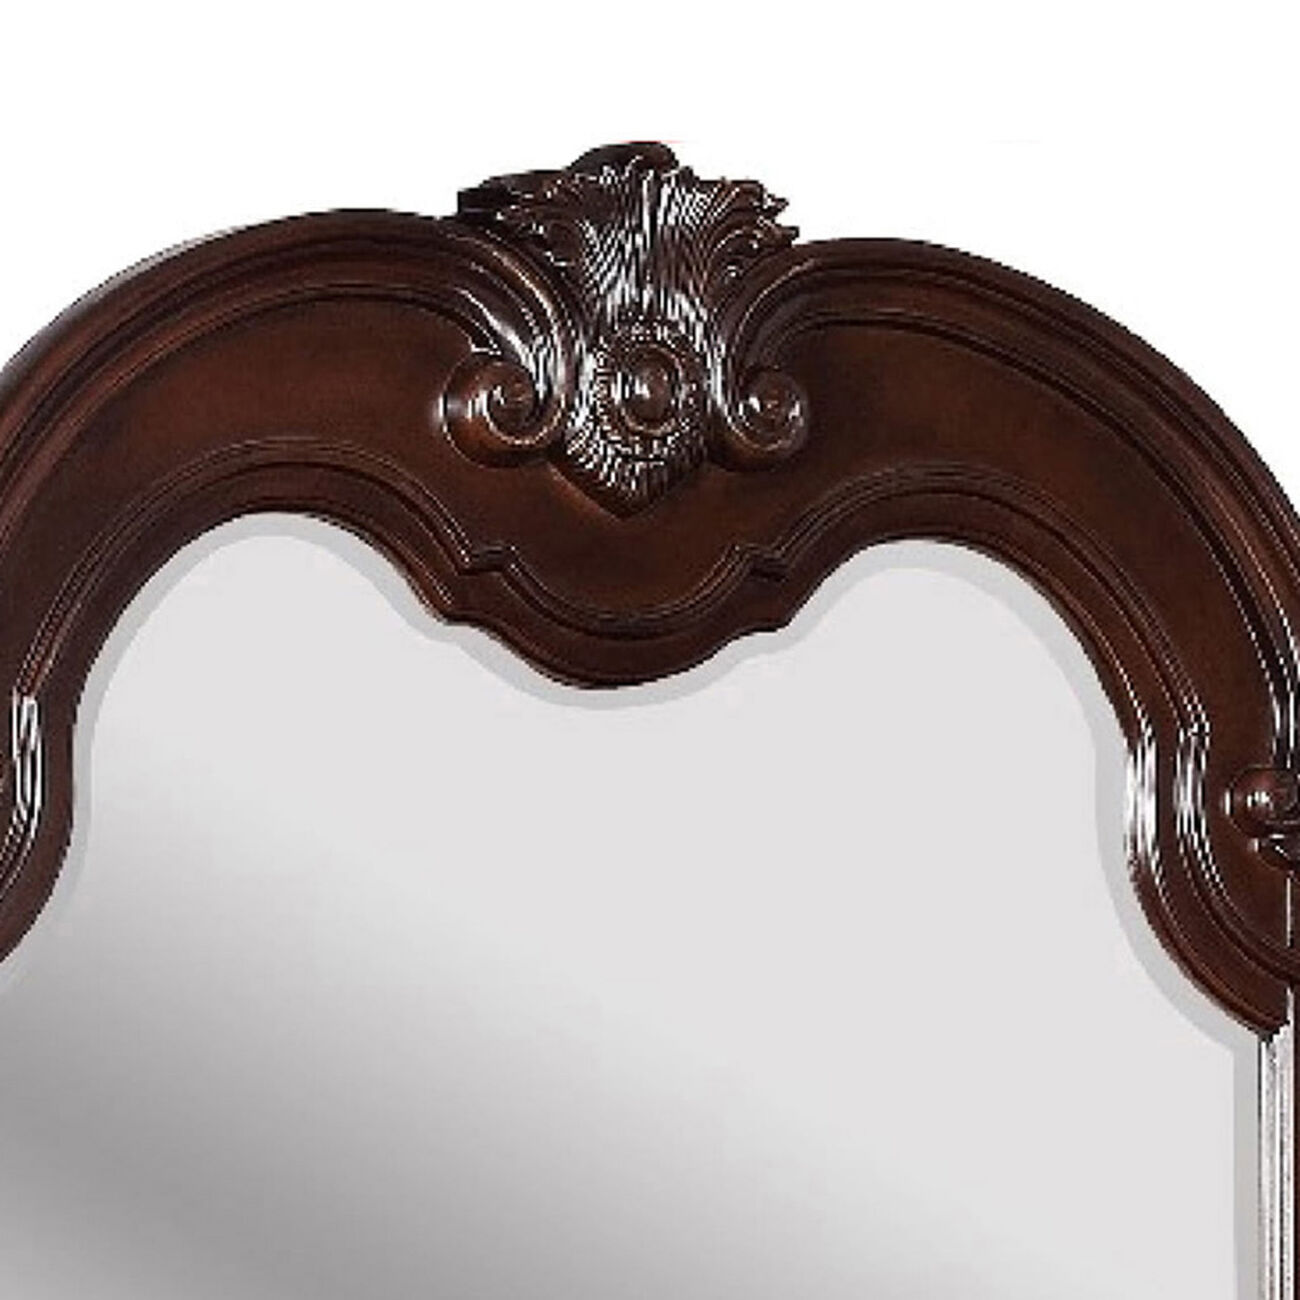 Traditional Wooden Crown Top Mirror with Intricate Carving, Brown